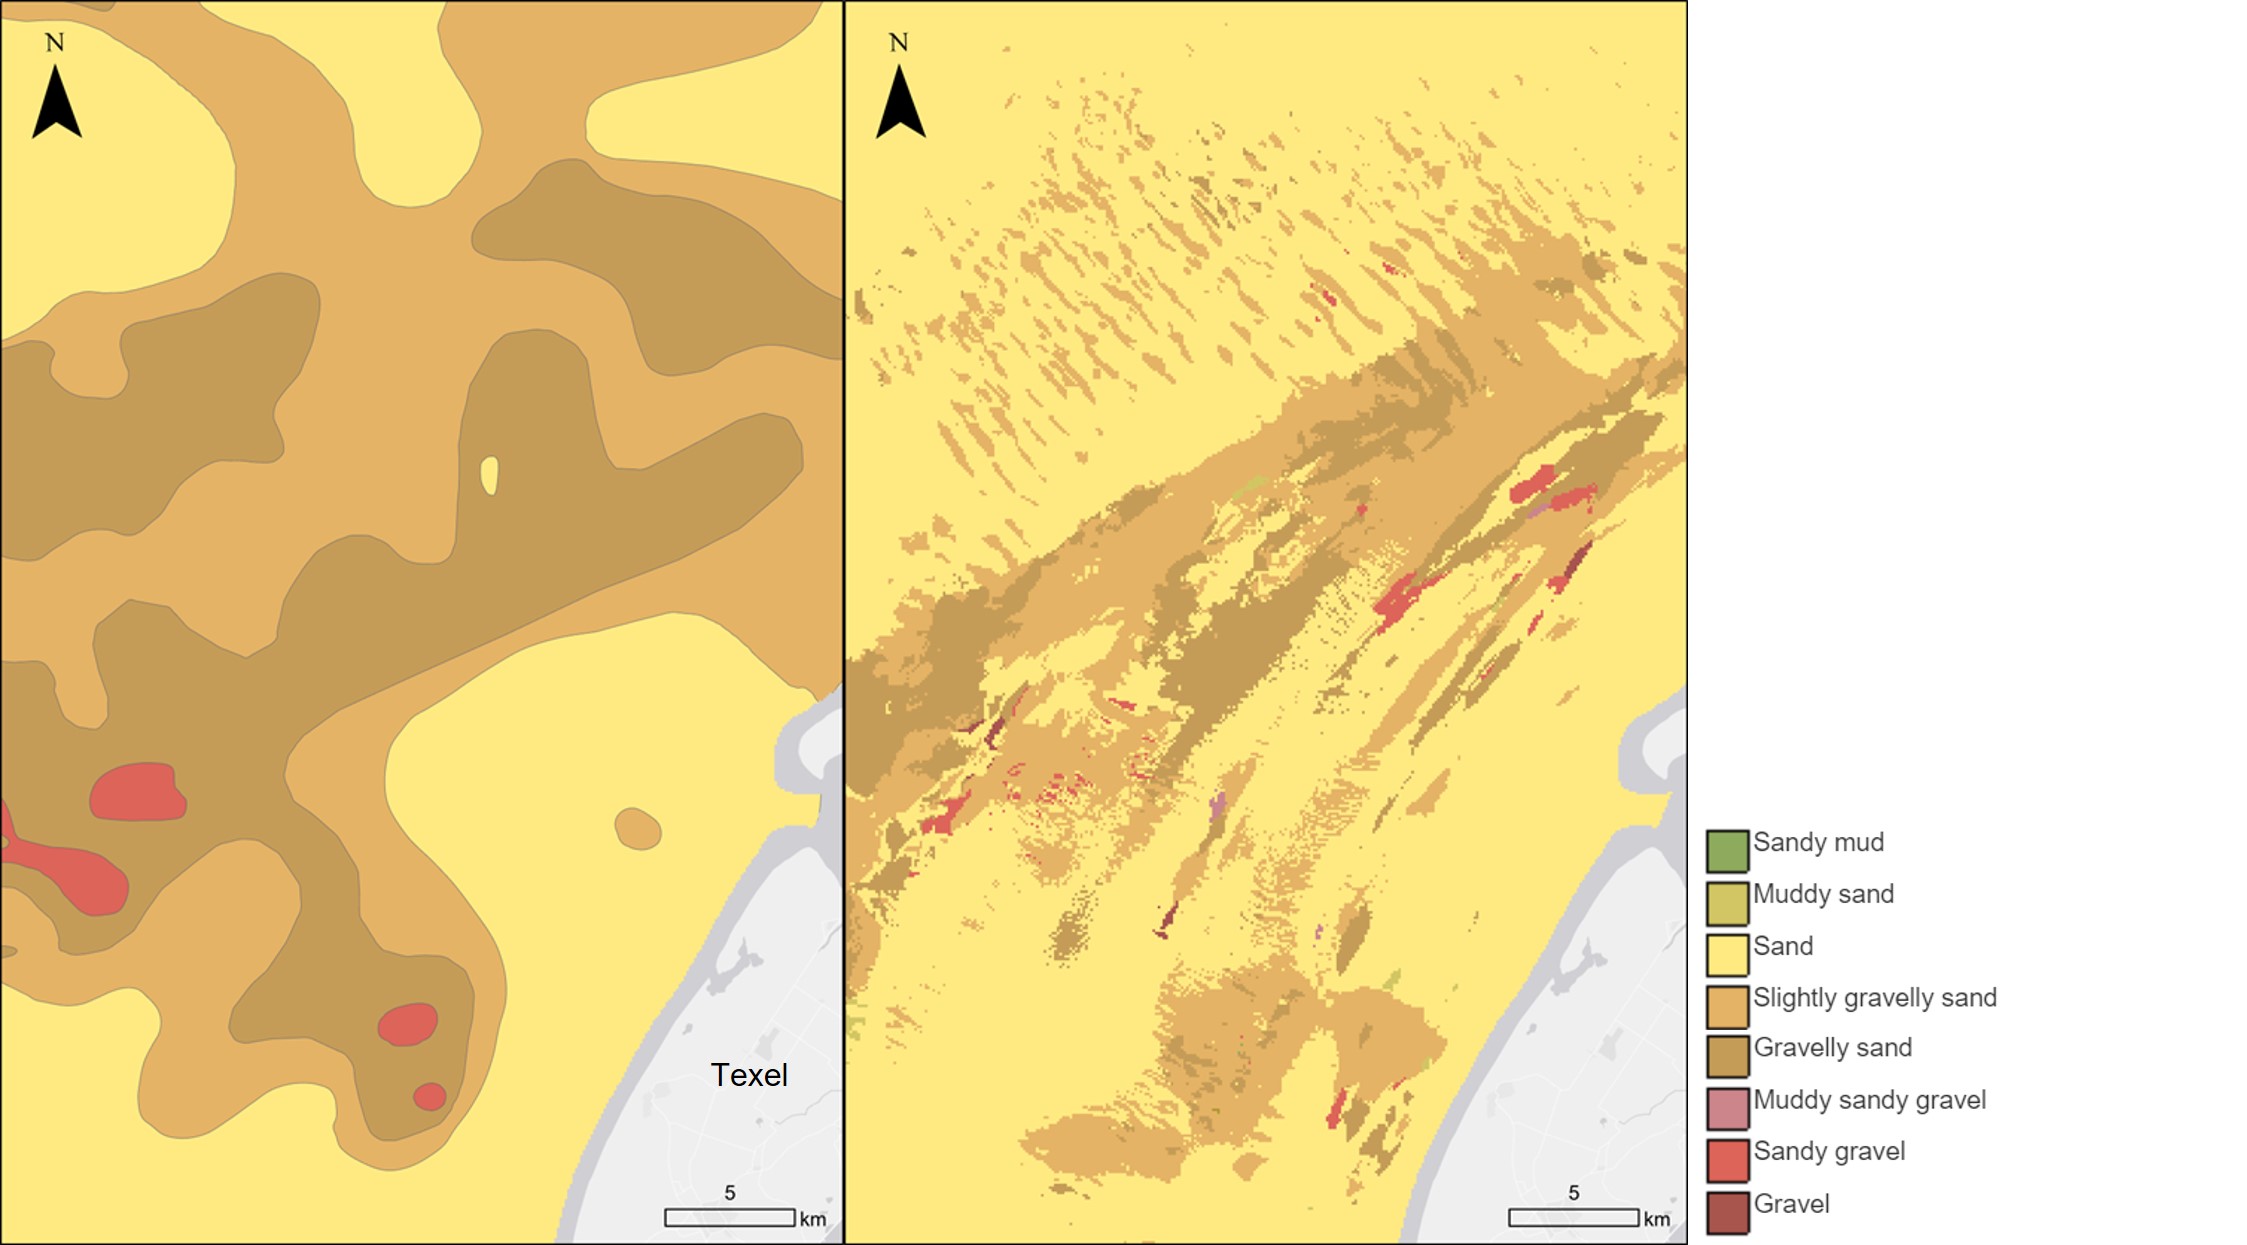 Old and new map views for an area northwest of Texel island of seabed-sediment map